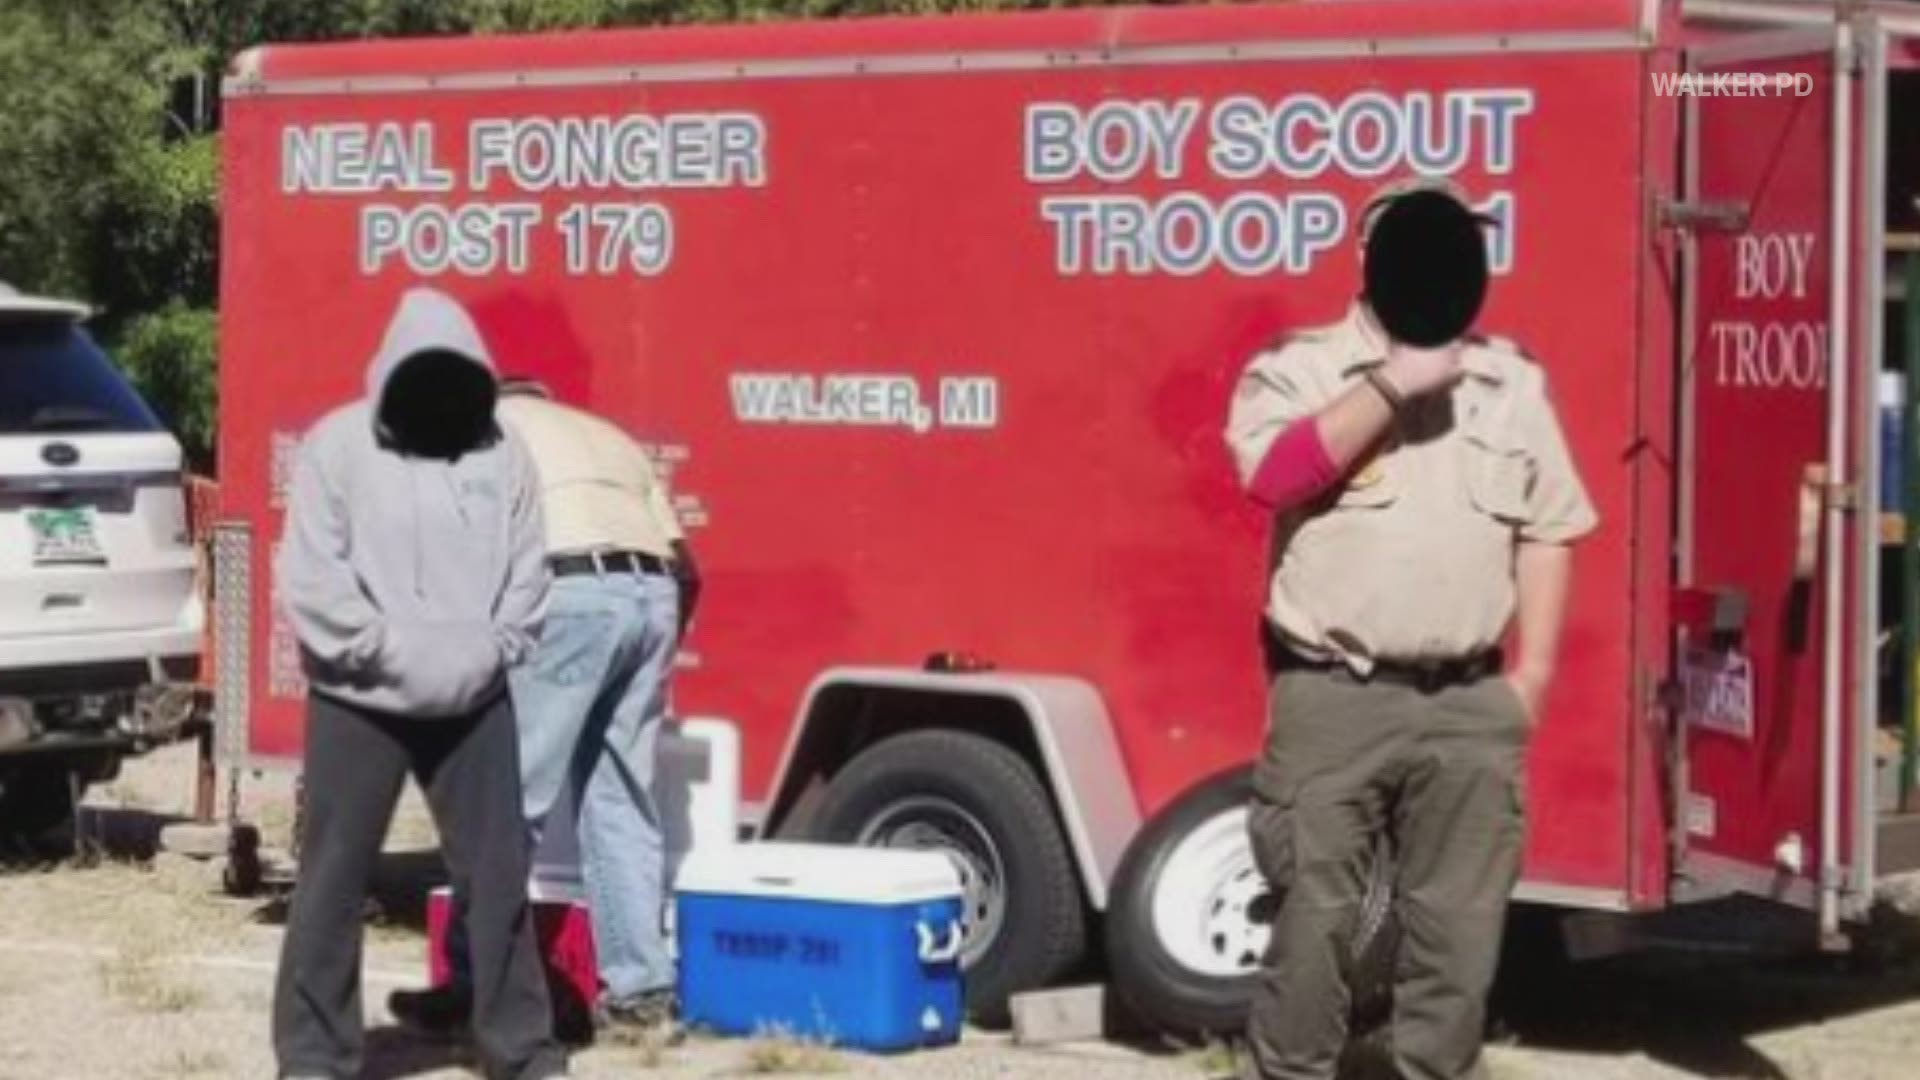 "It takes a special kind of thief to steal from a Boy Scout Troop," the post said. The people in the photos are not related, according to police.